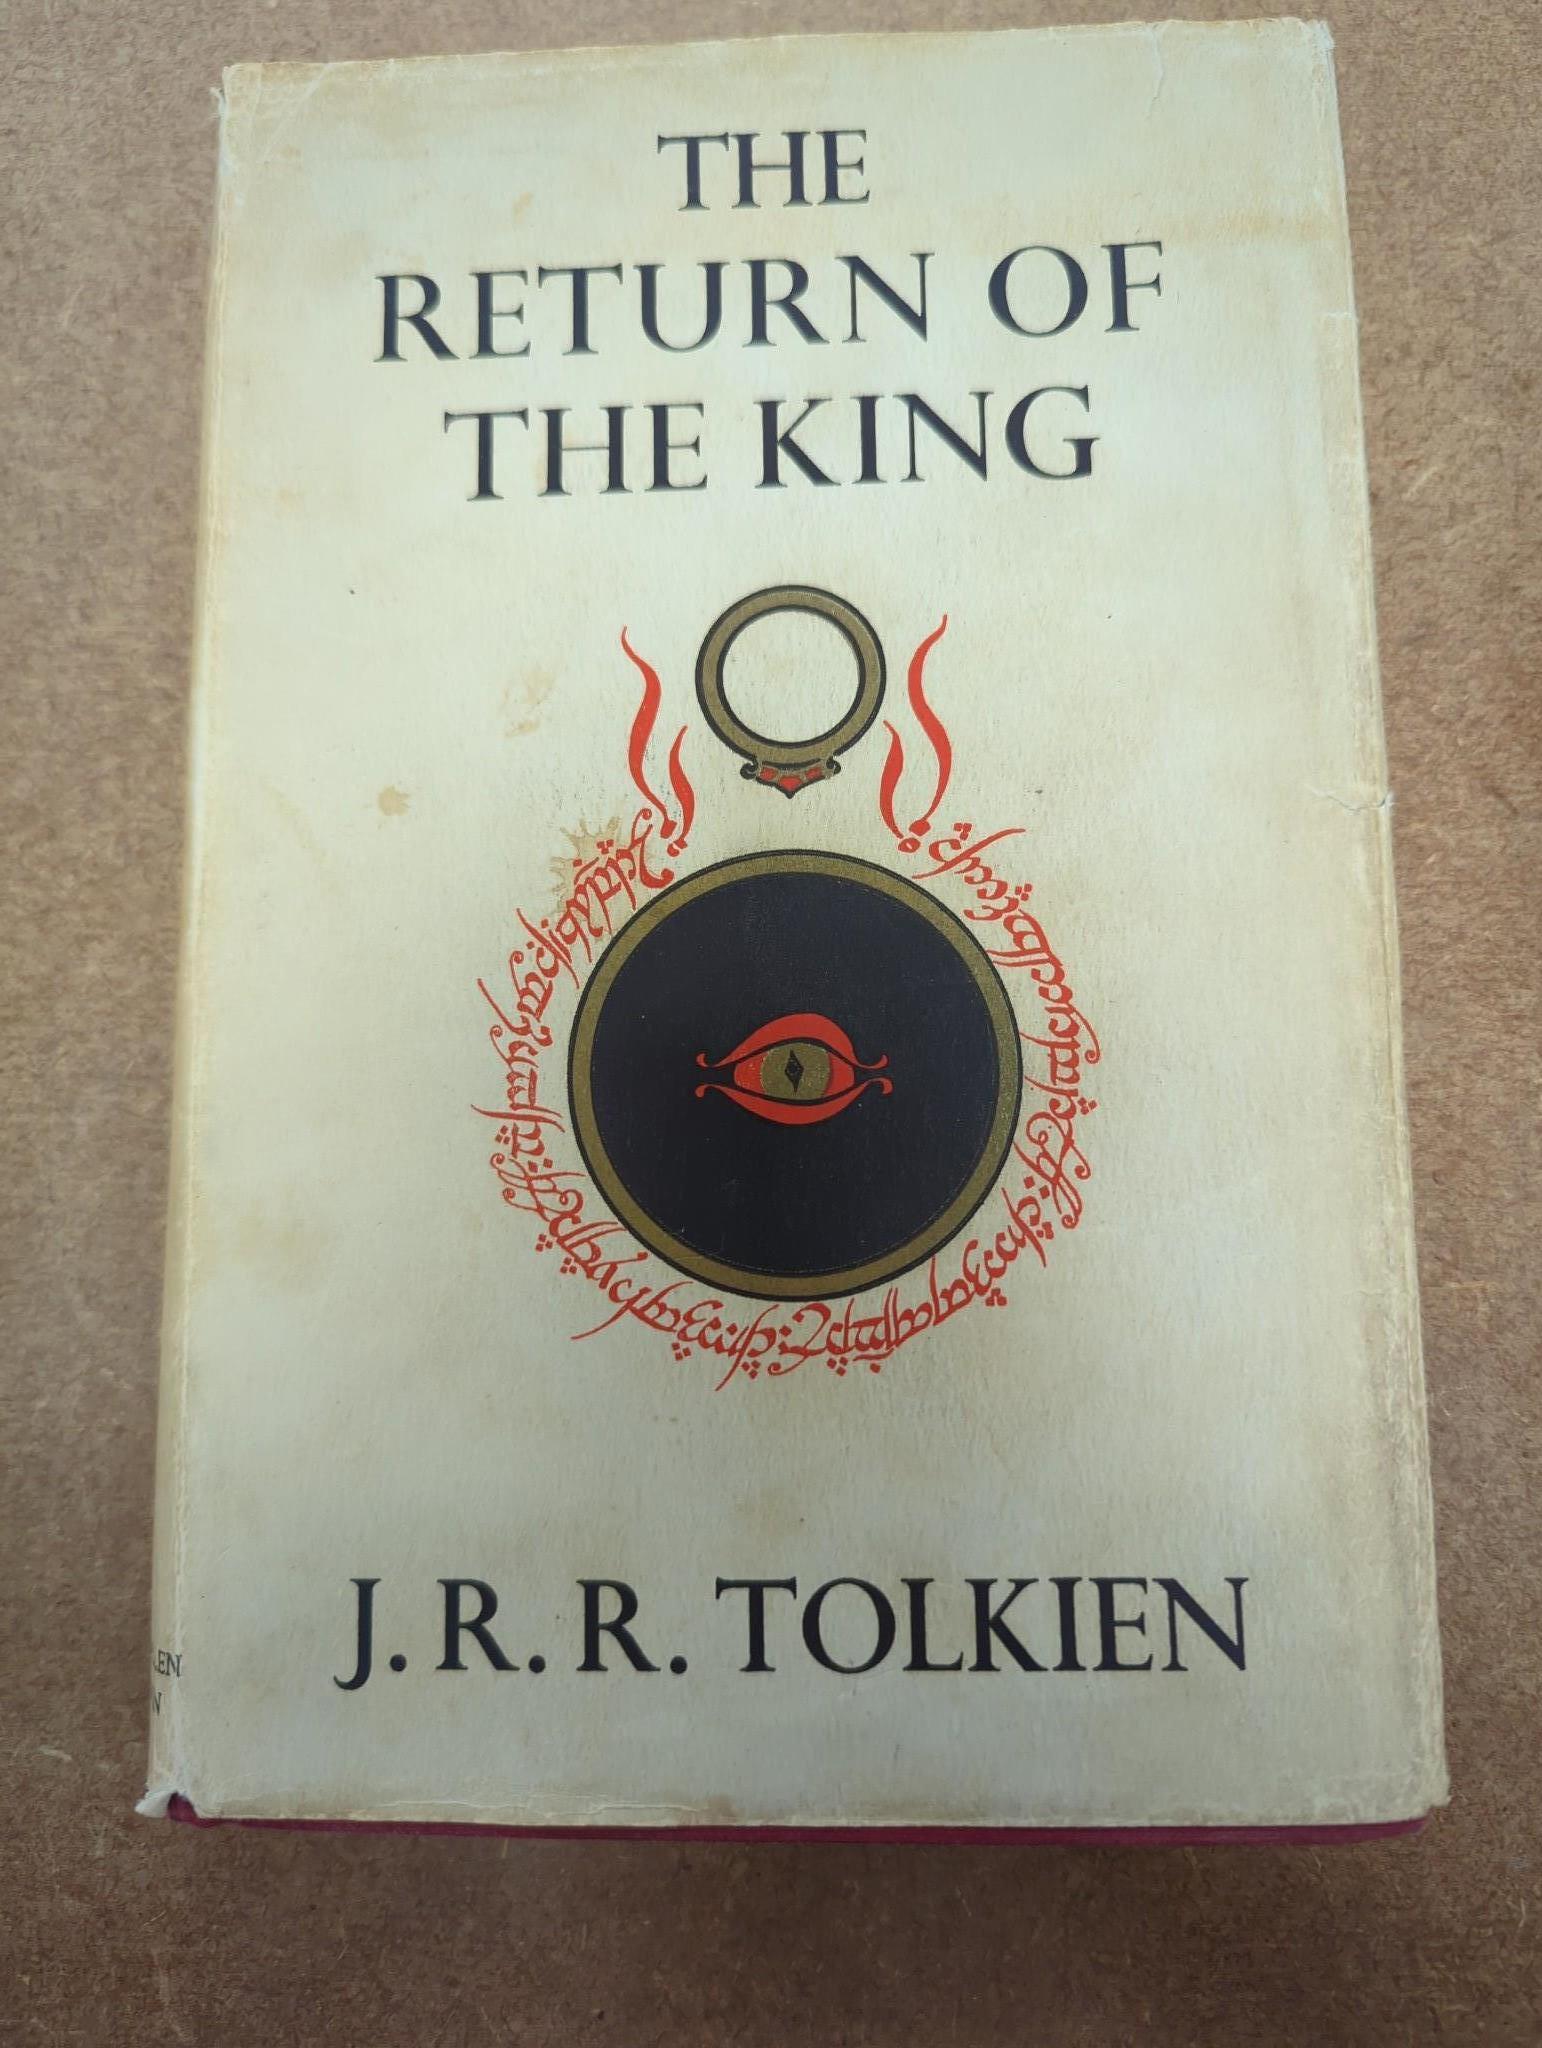 J.R.R. Tolkien - The Lord Of The Rings trilogy